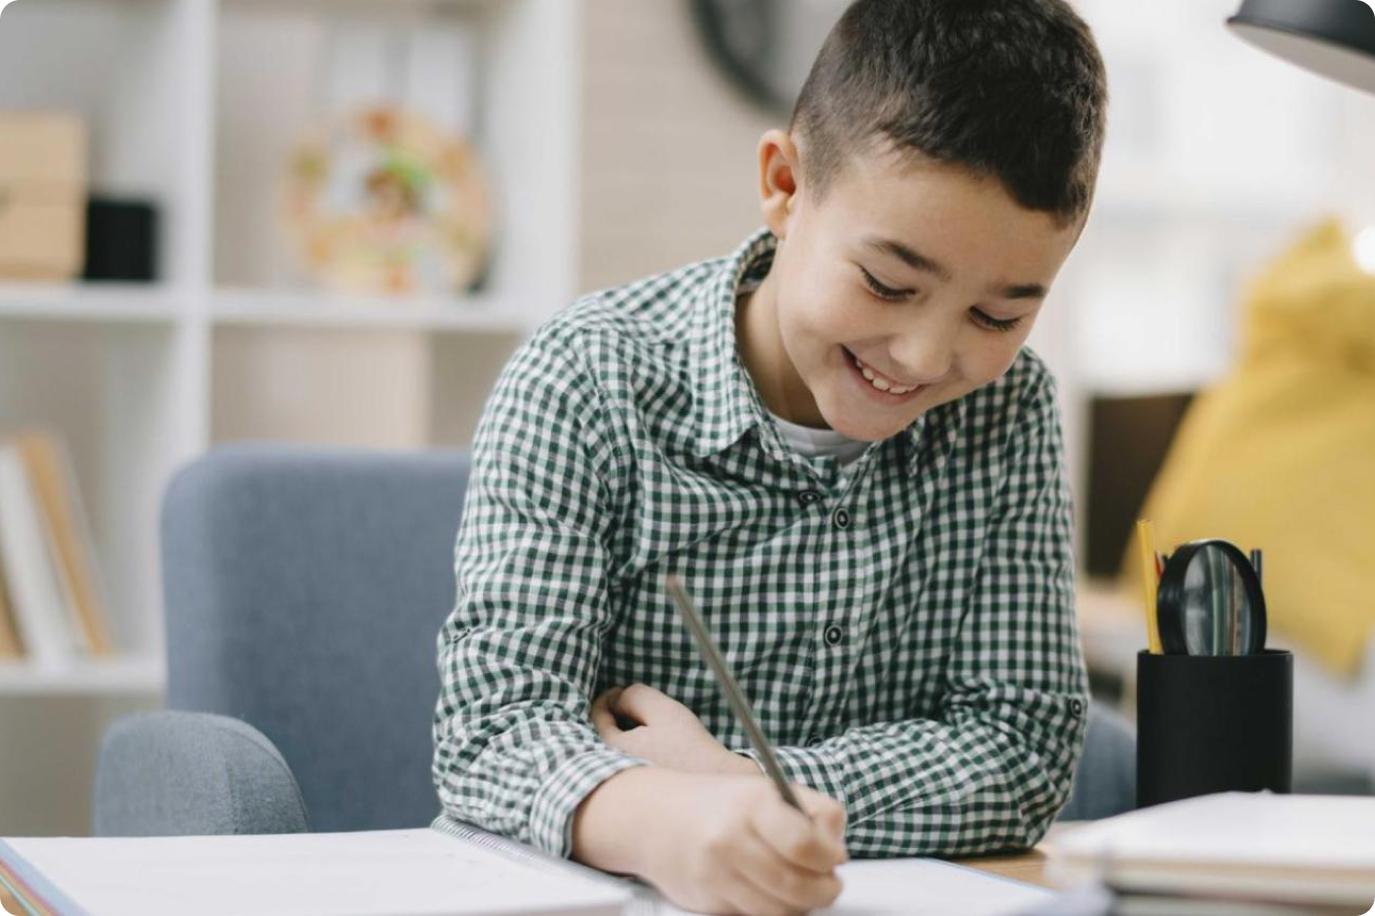 Boy wearing a green checked shirt and grinning while writing in a notebook